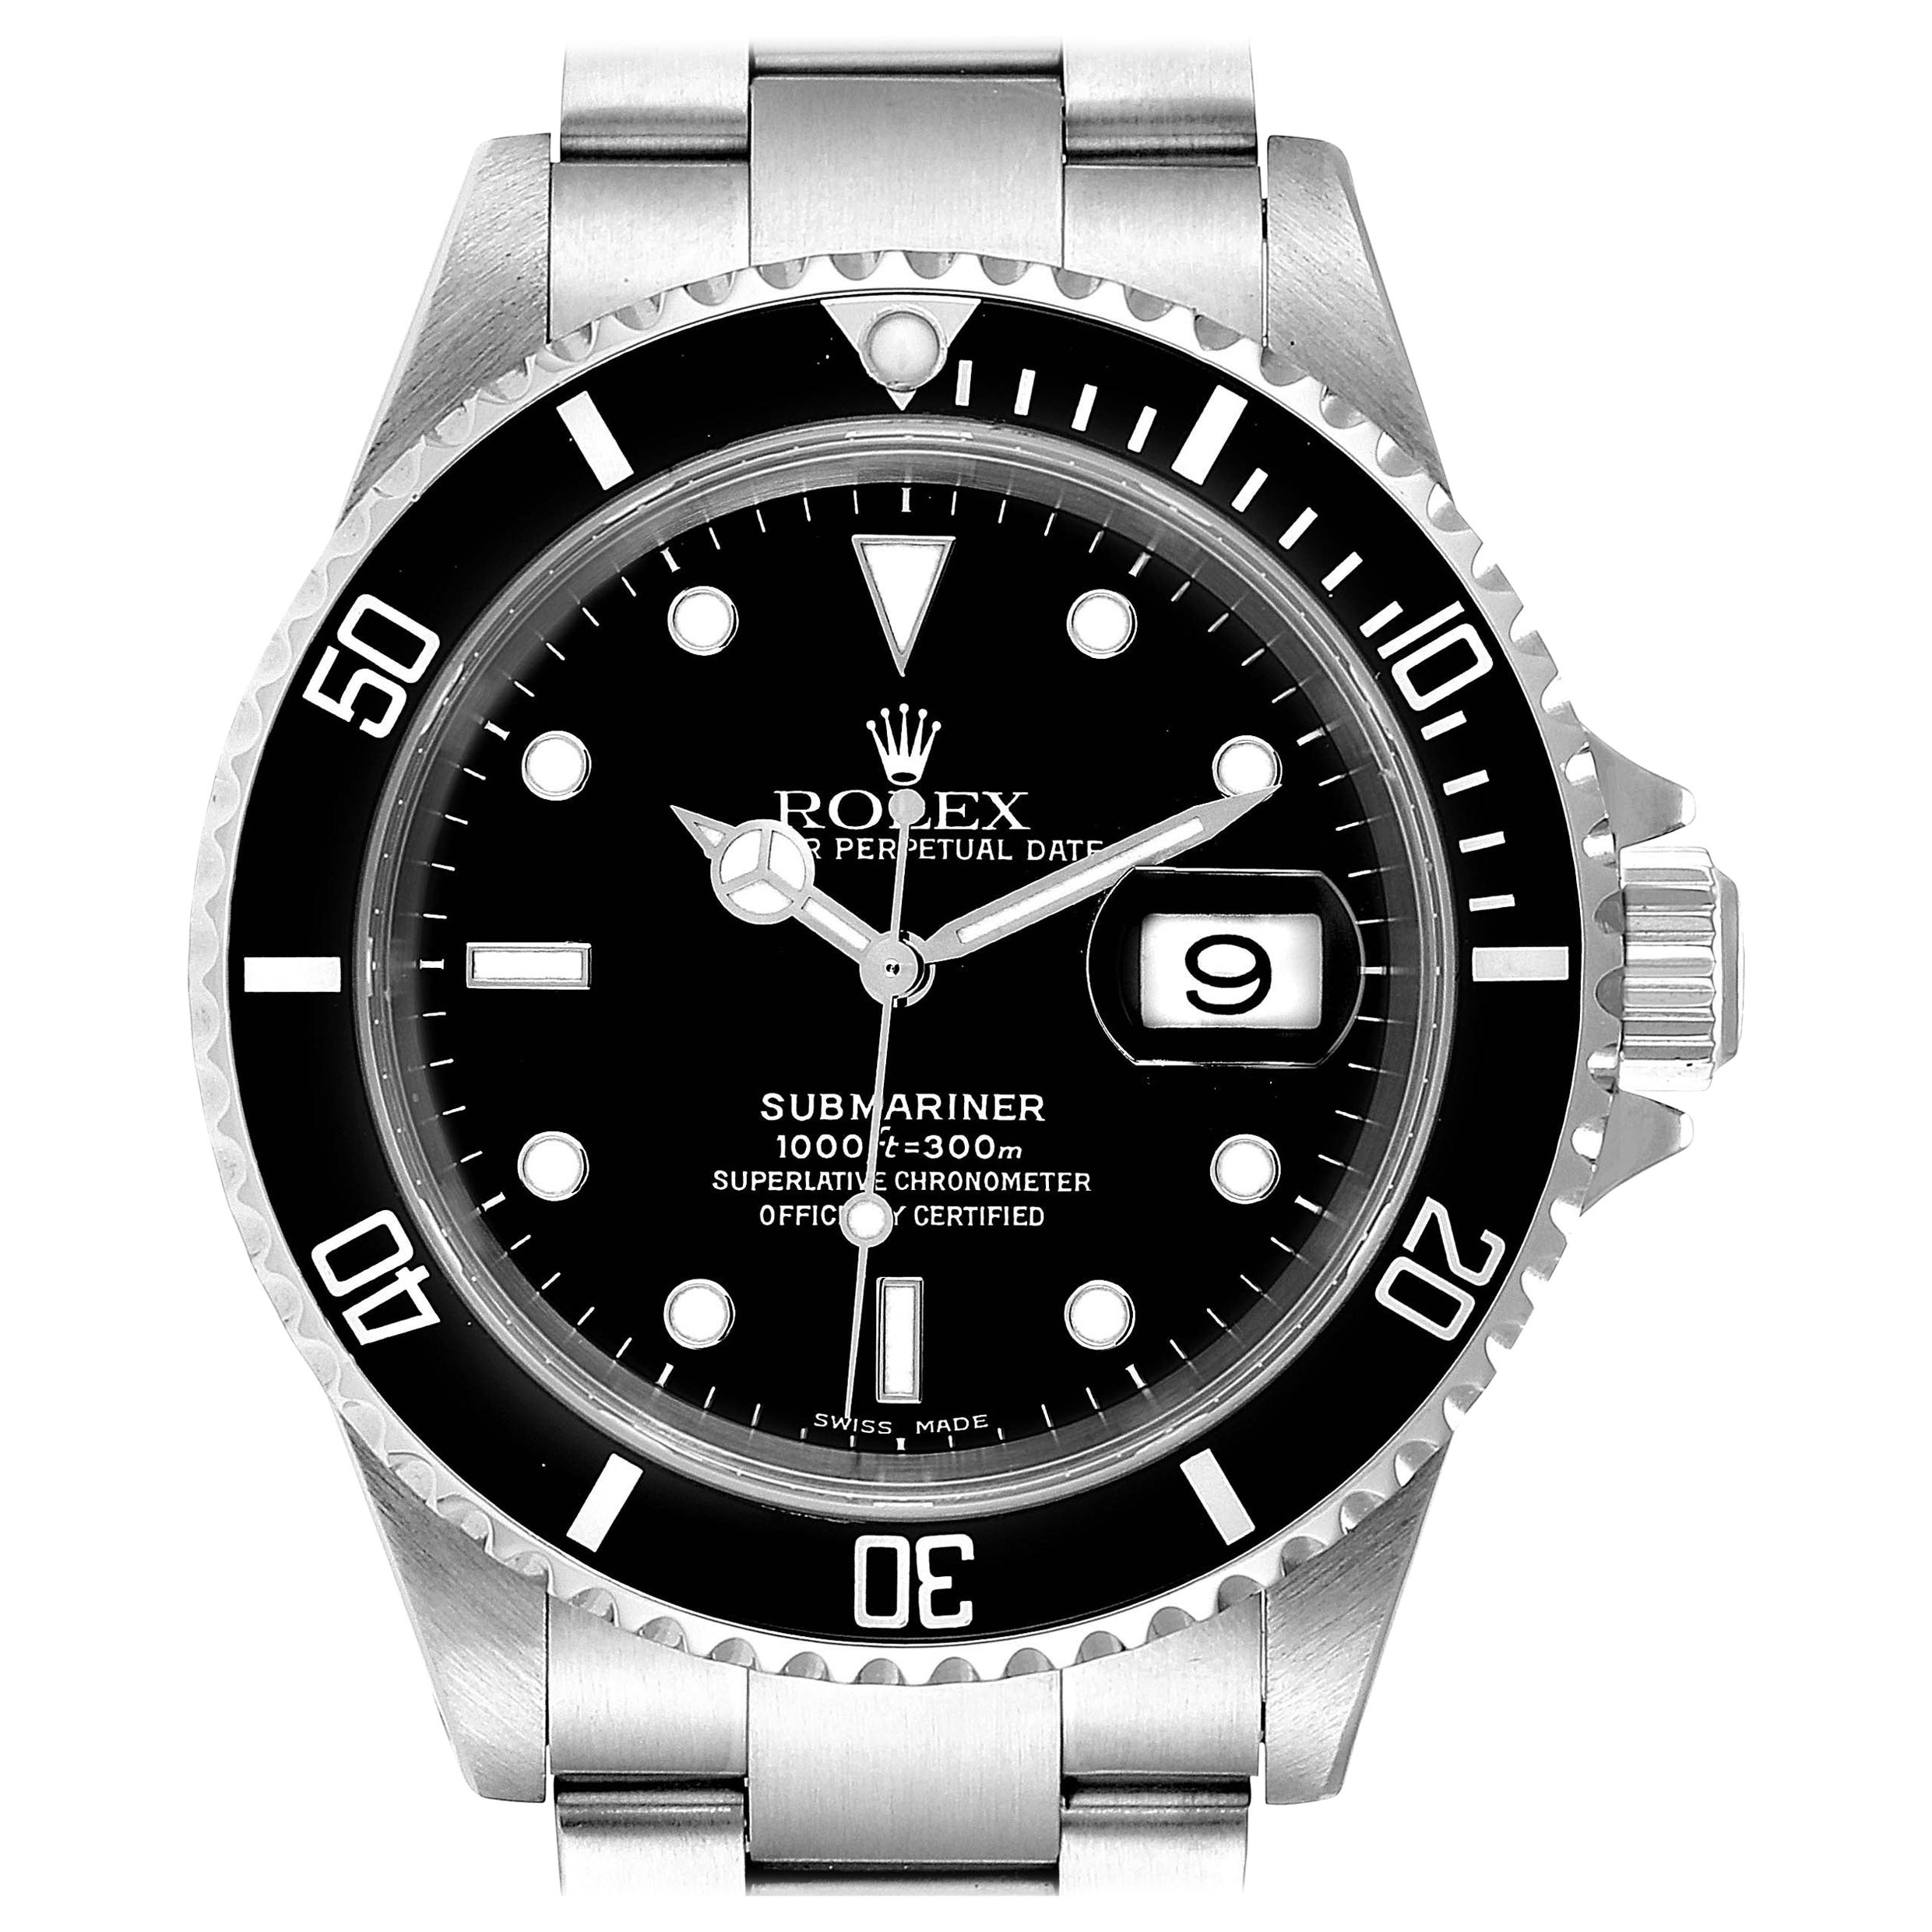 Rolex Submariner Date Stainless Steel Men's Watch 16610 Box Papers